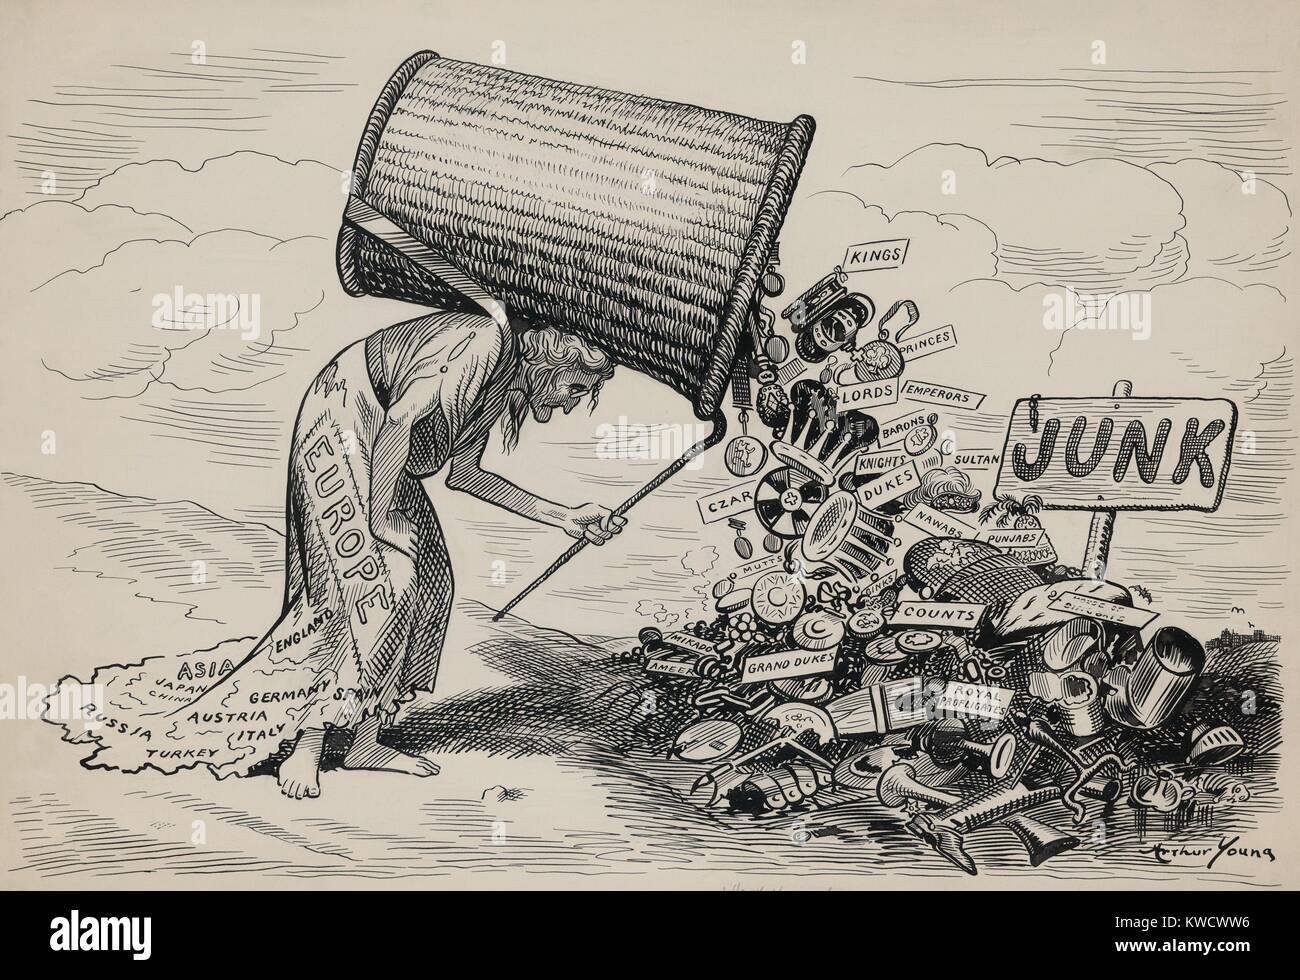 SOMEDAY. An old woman representing Europe, dumps the attributes of monarchy in a junk pile. 1910 drawing by Art Young expresses his conviction that monarchs will some day be an obsolete form of government (BSLOC 2017 1 32) Stock Photo